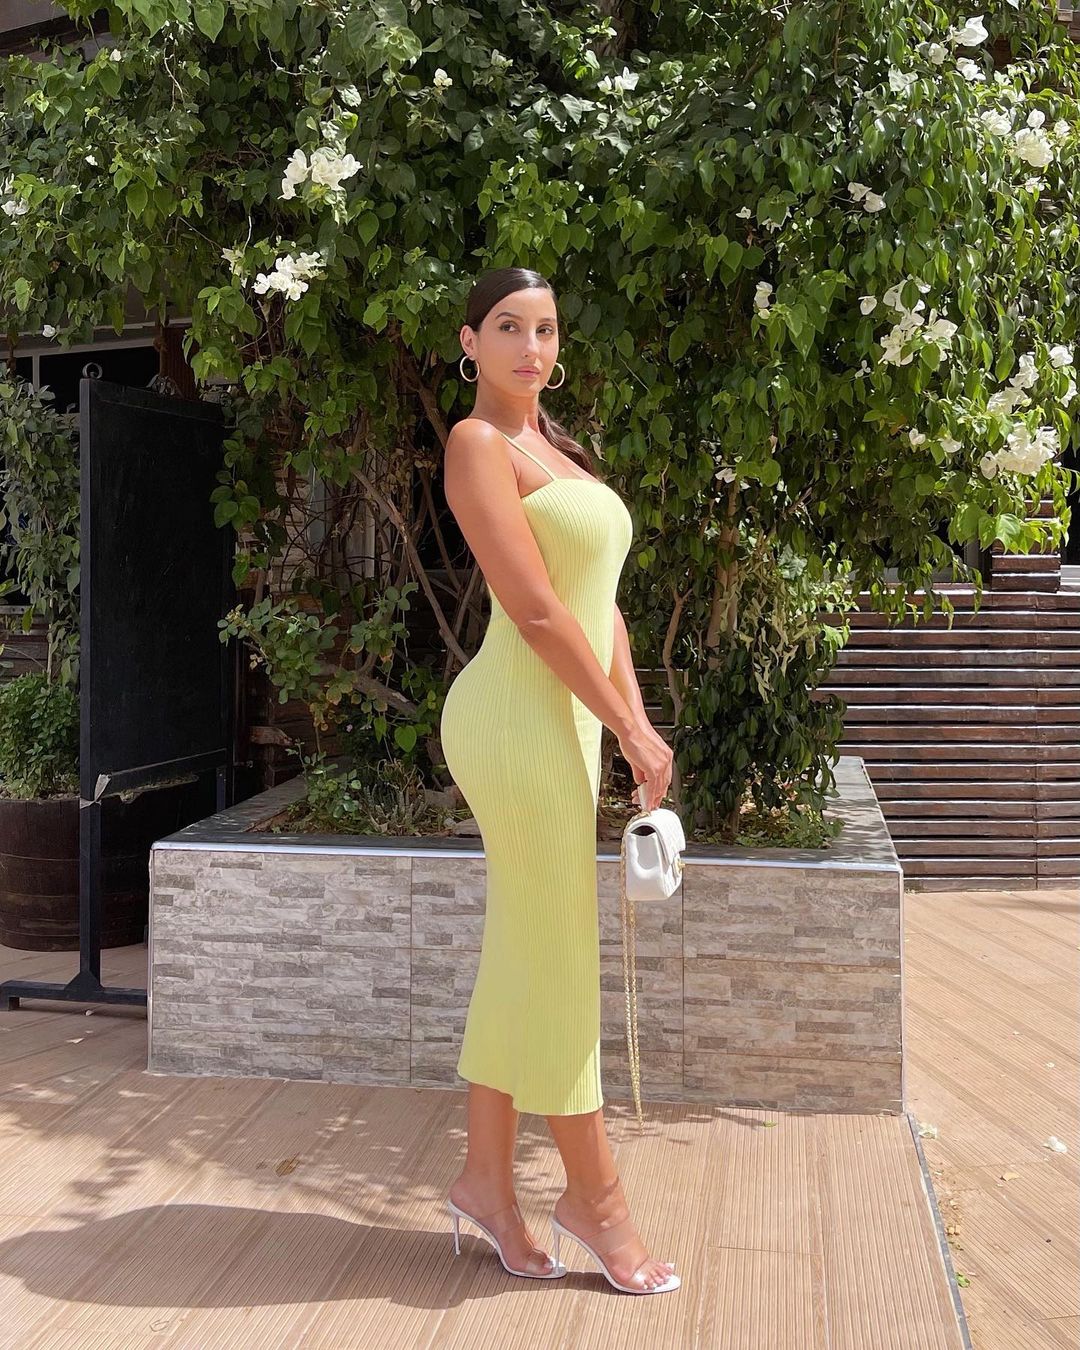 Nora Fatehi looks spectacular in the green bodycon dress.